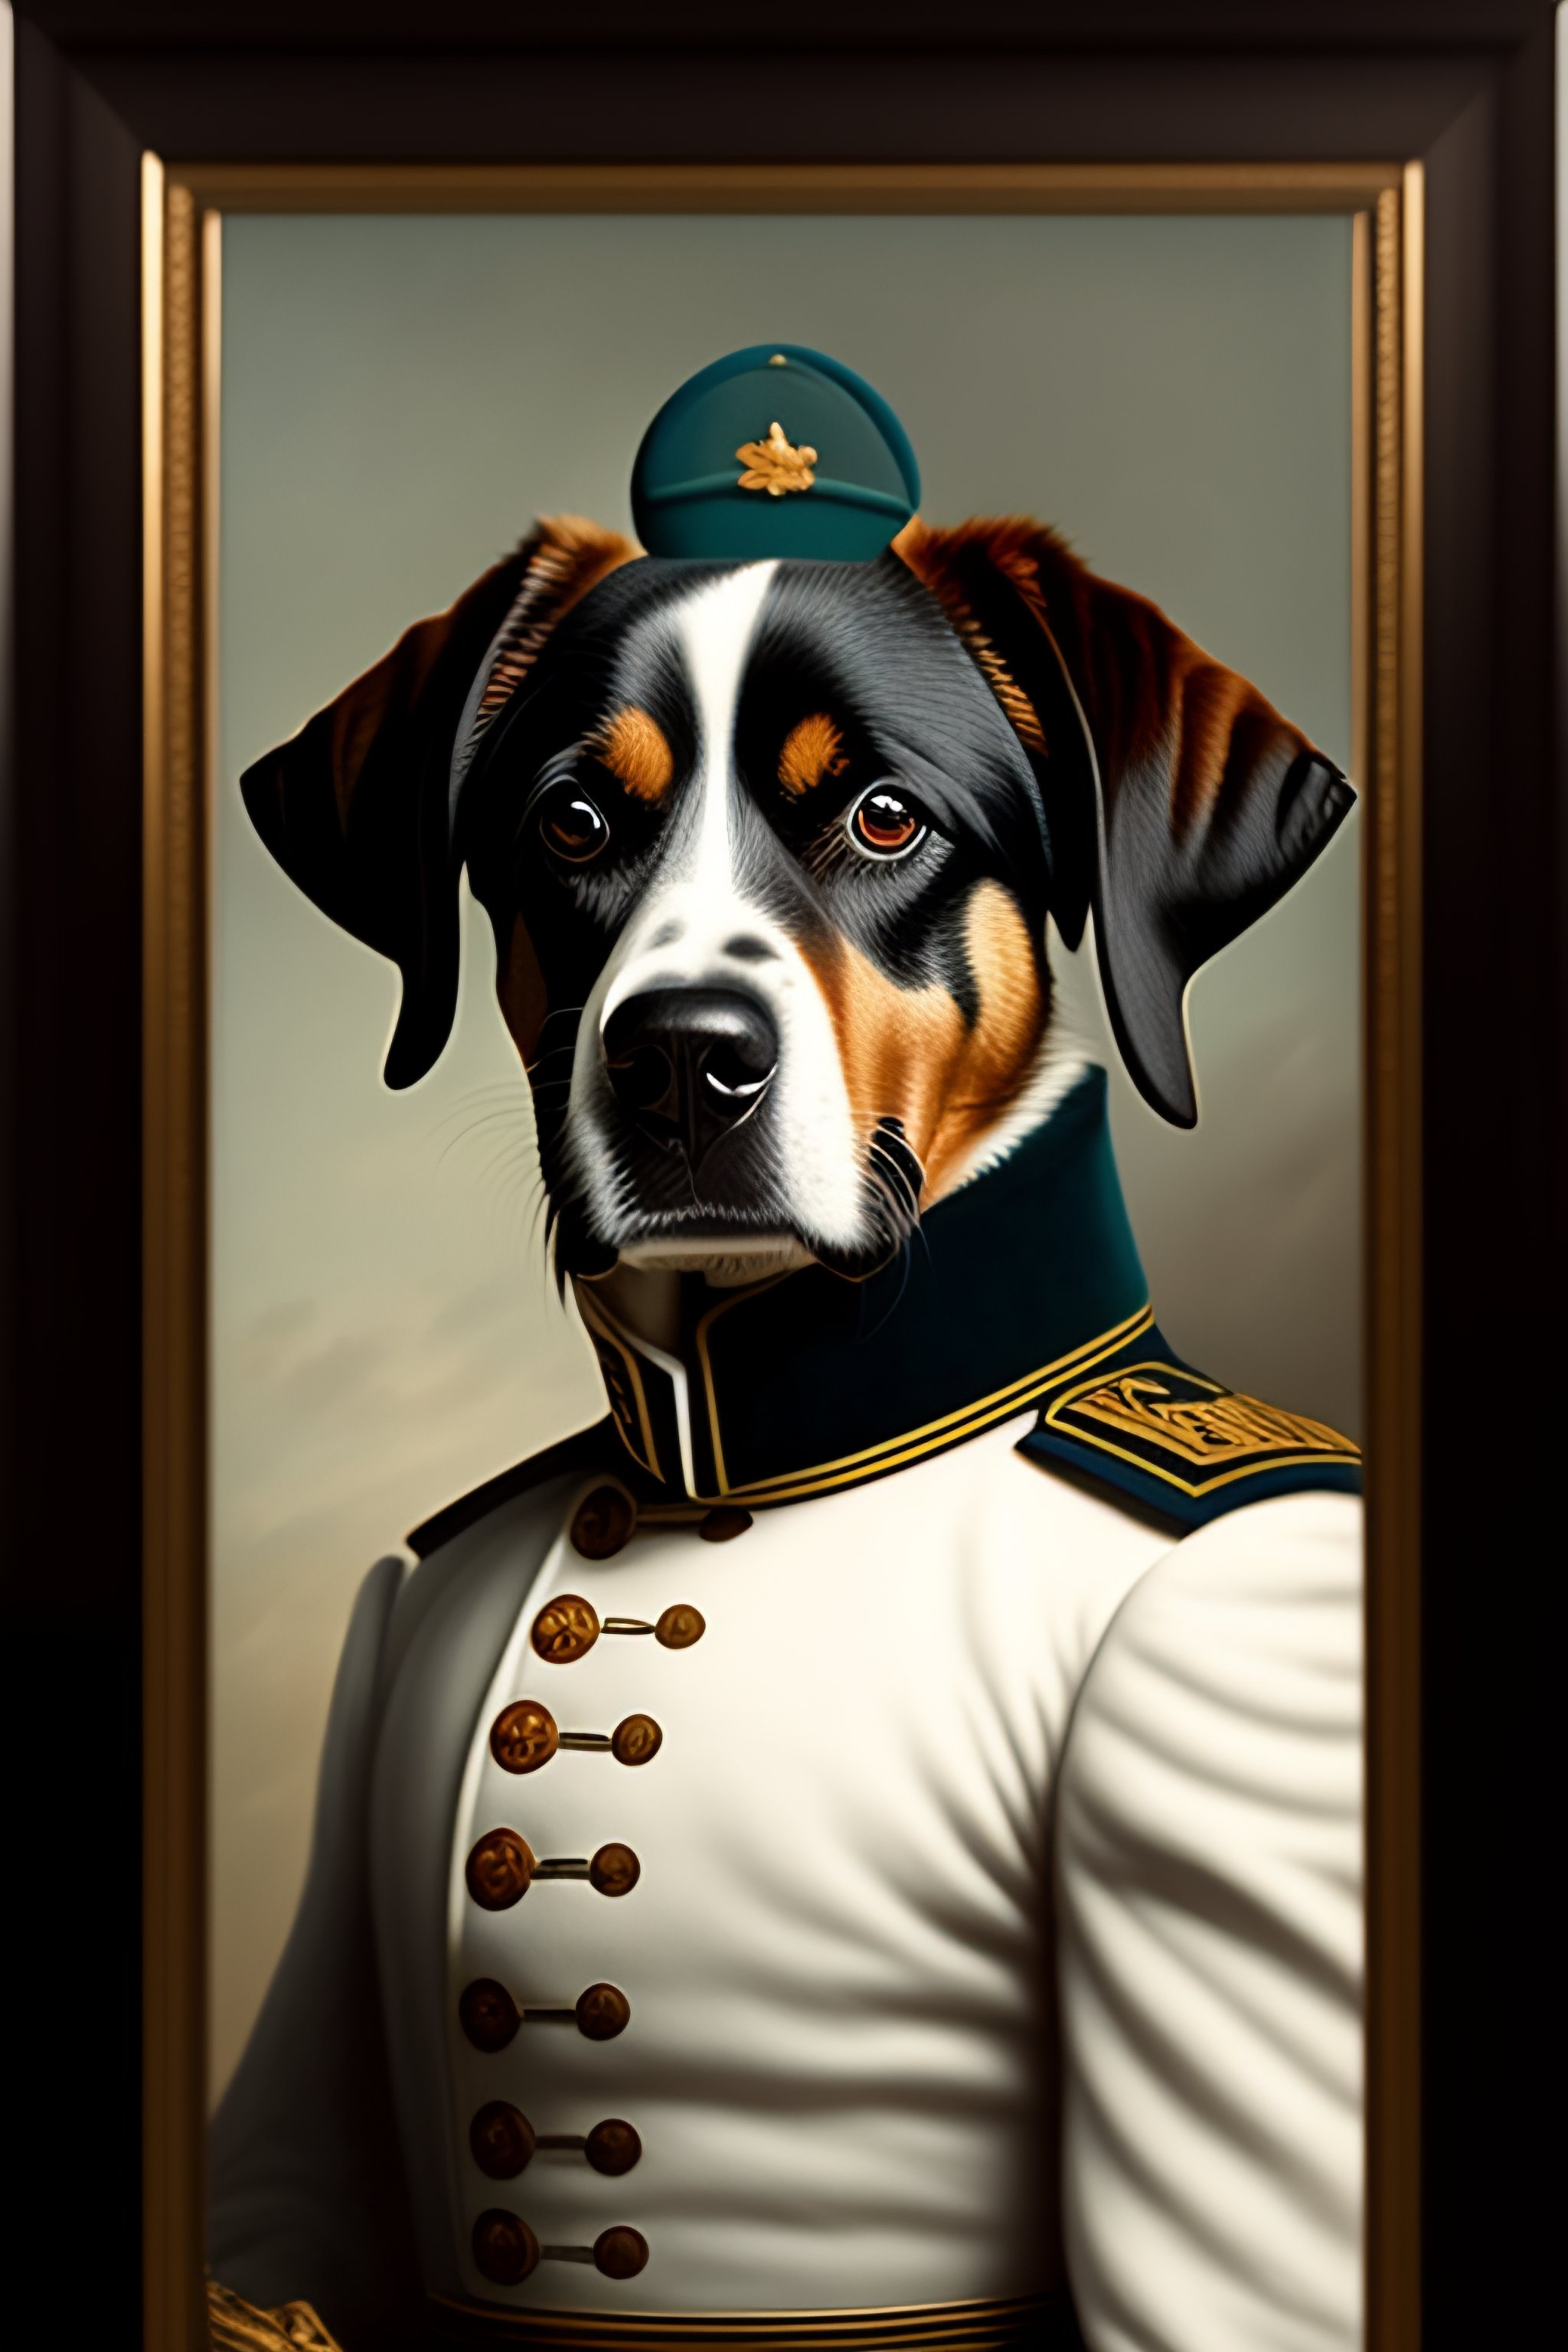 Cerveza espalda luego Lexica - Portrait of a stoic dog wearing a military uniform, 1800's painting